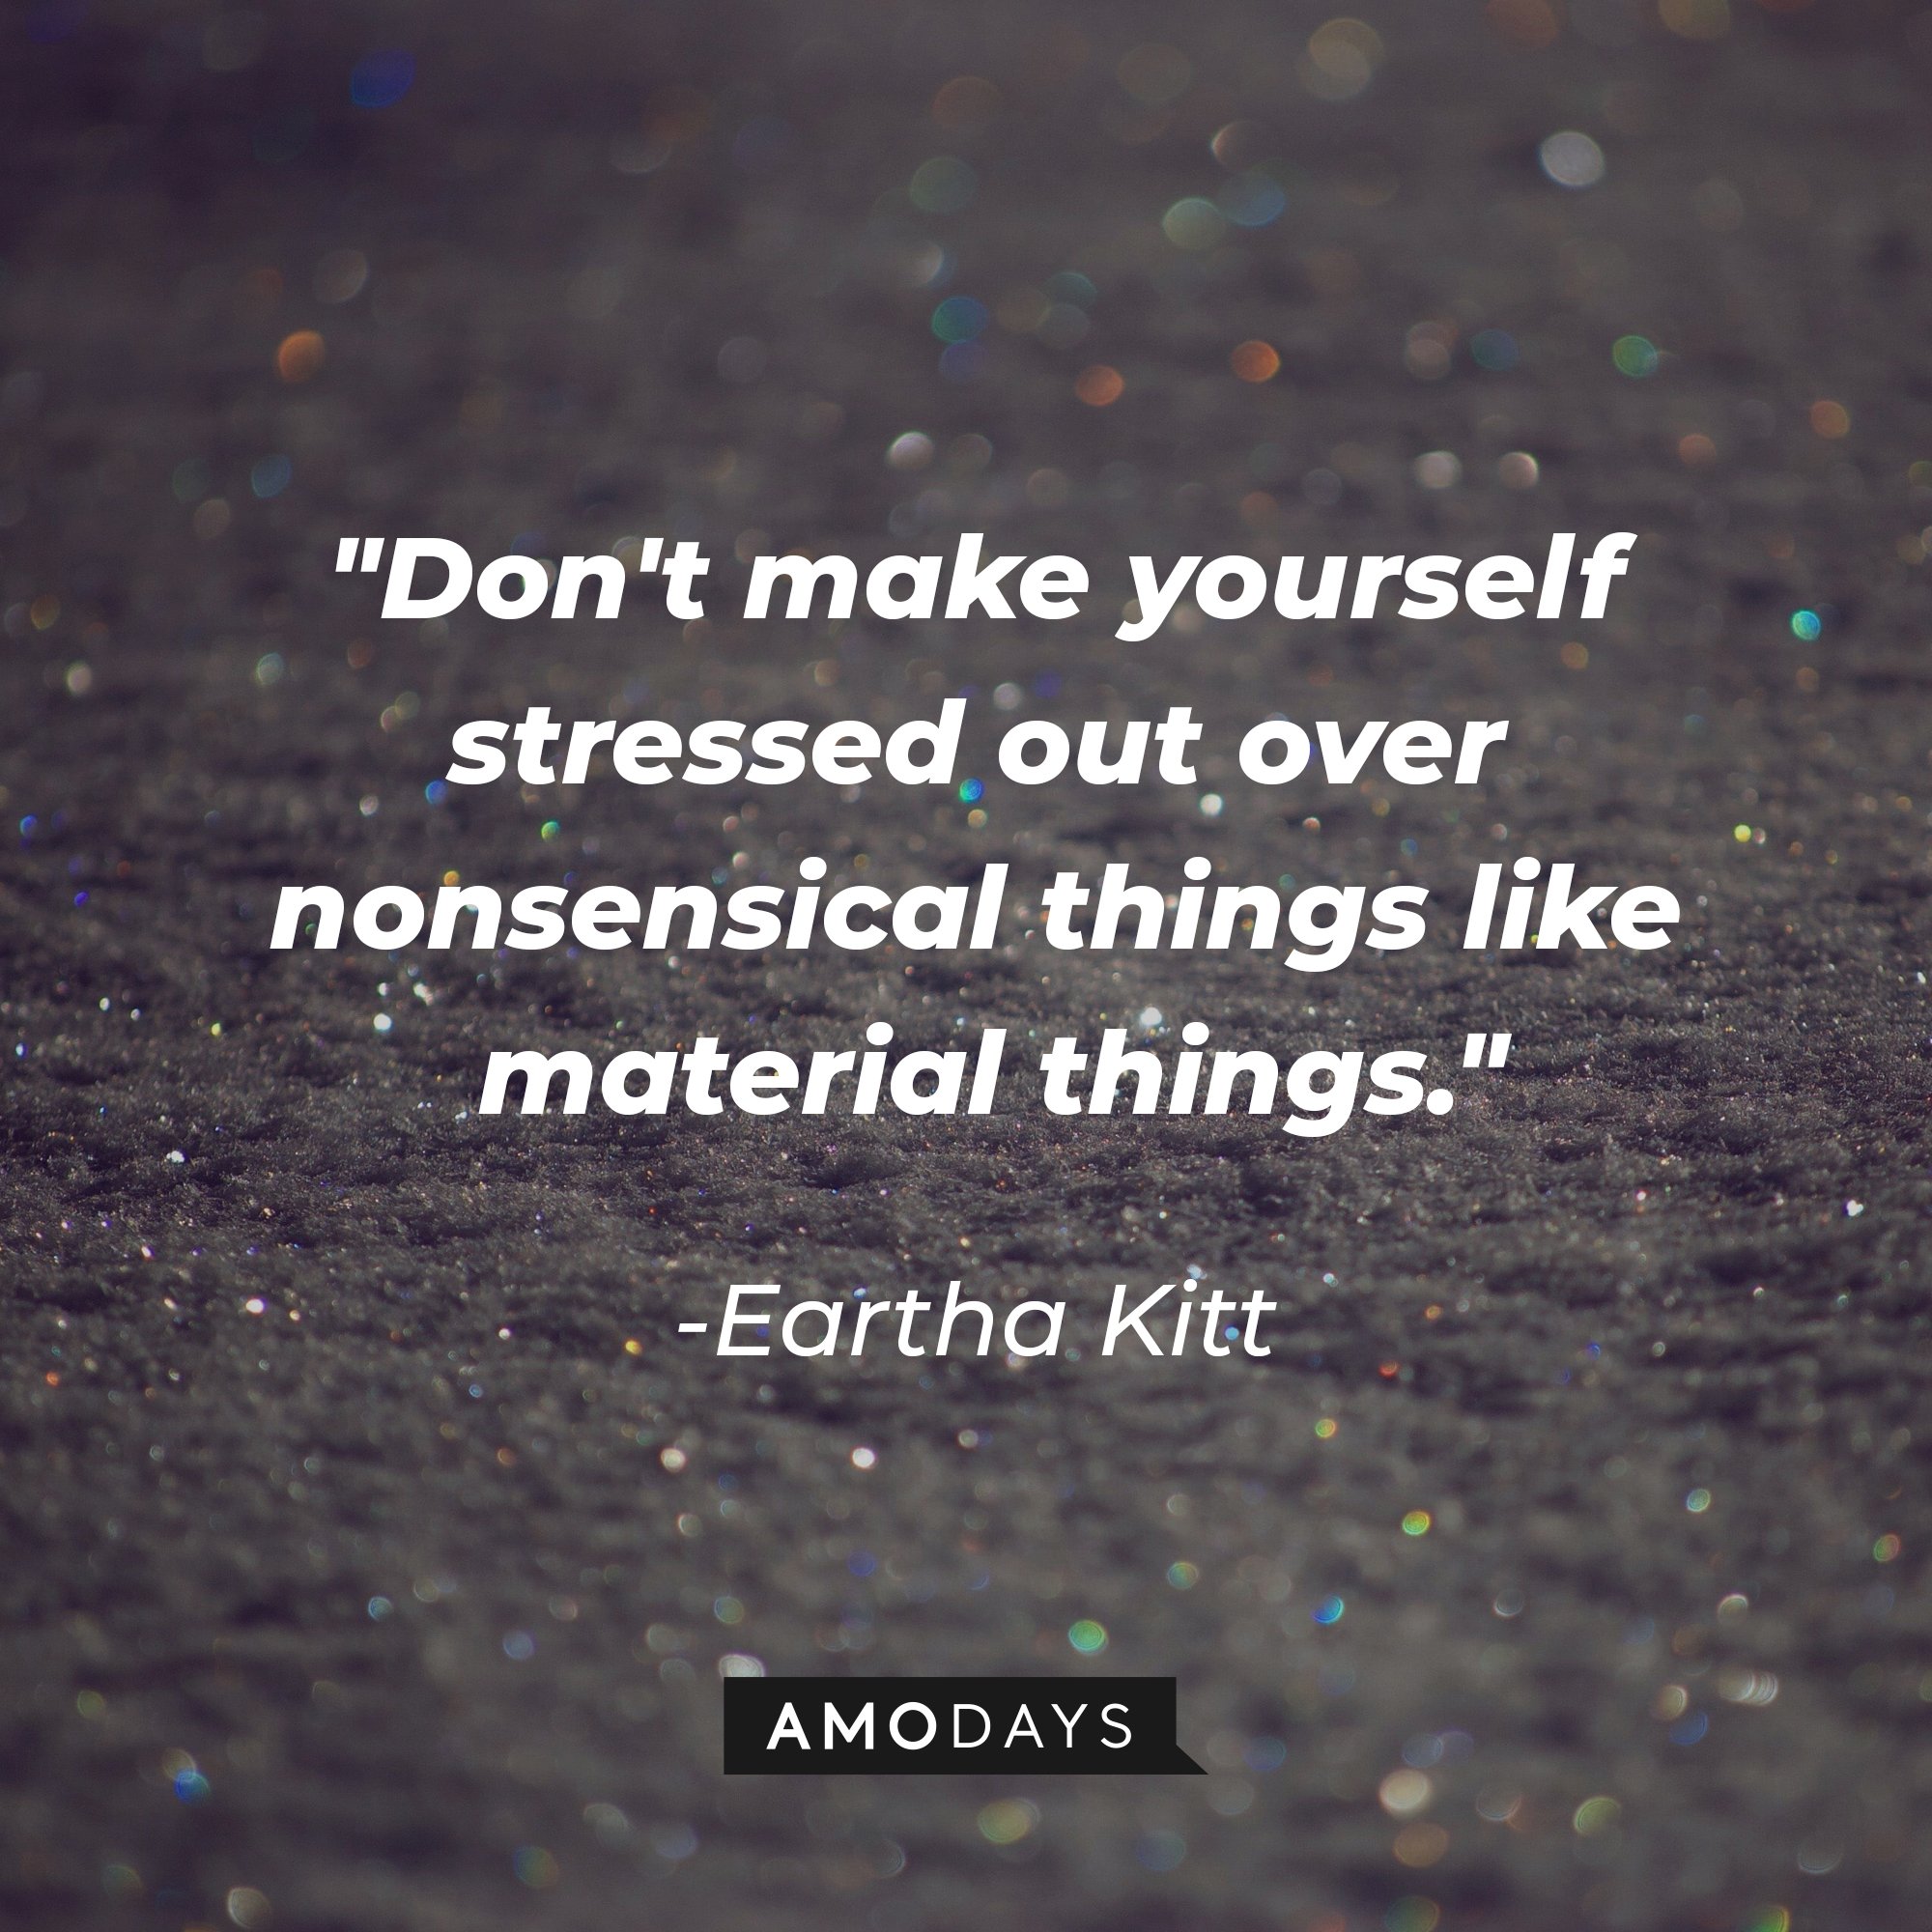 Eartha Kitt’s quote: "Don't make yourself stressed out over nonsensical things like material things." | Image: AmoDays